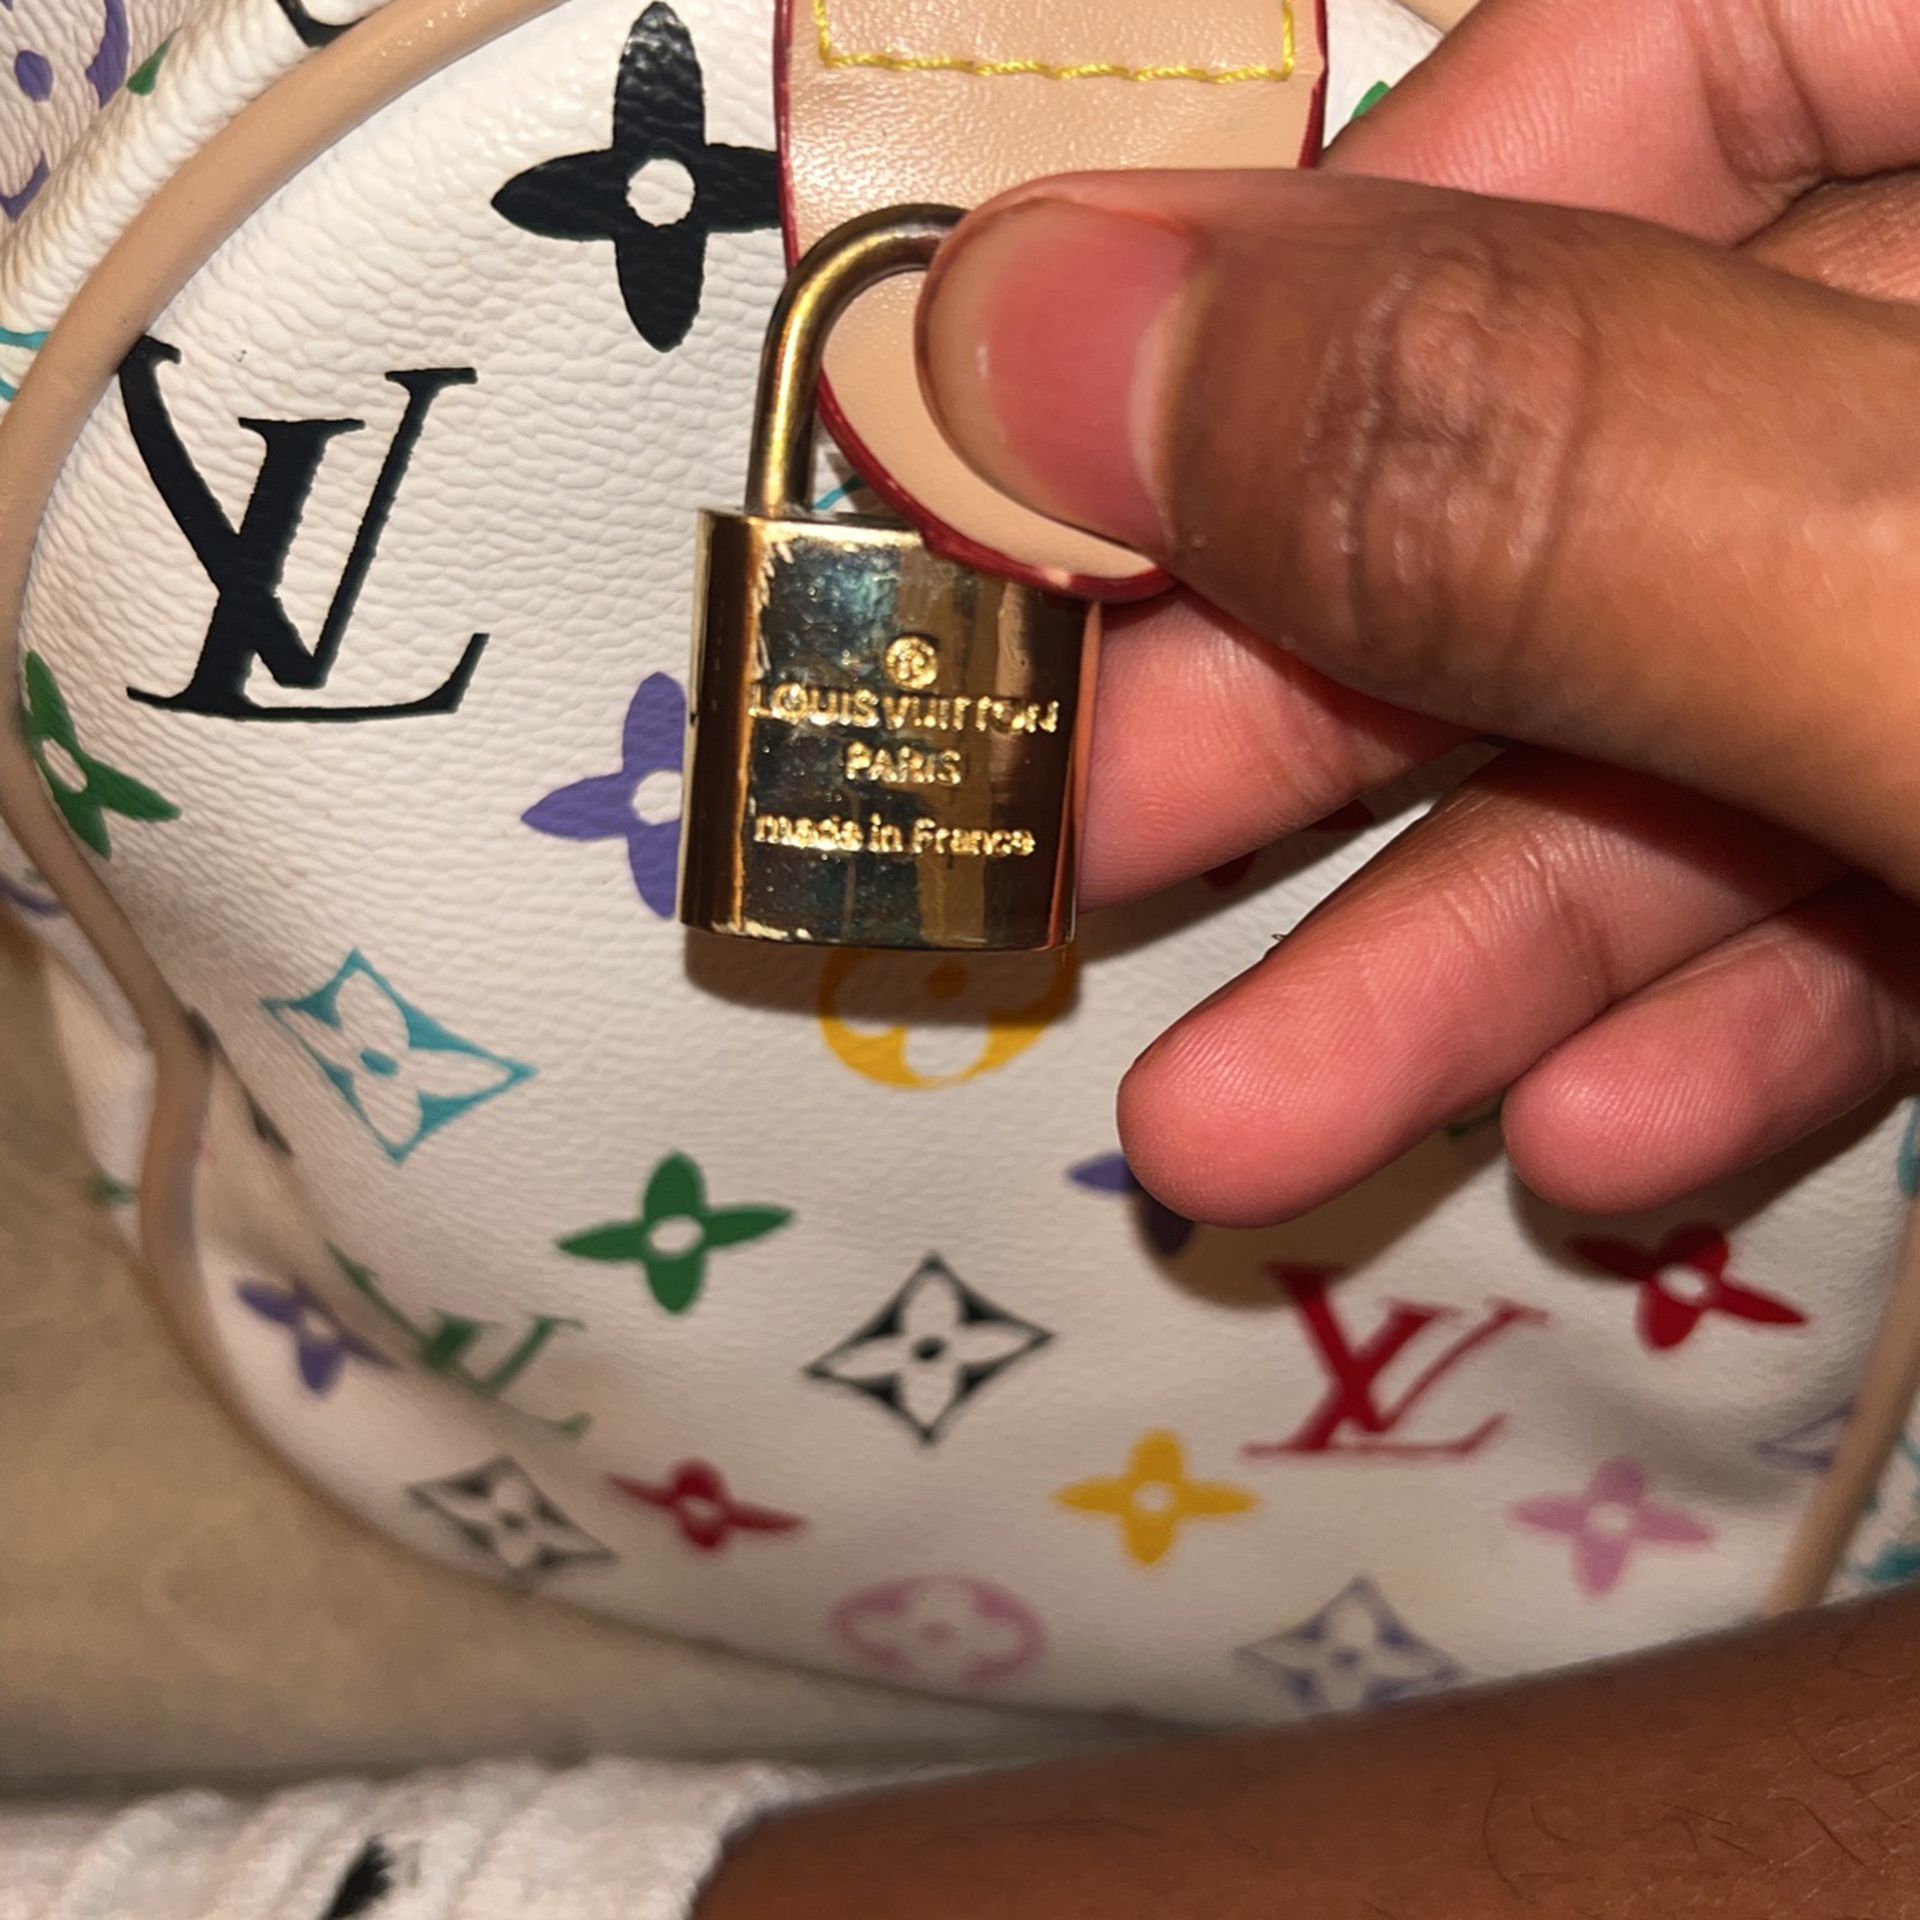 LV. Bag for Sale in Round Rock, TX - OfferUp